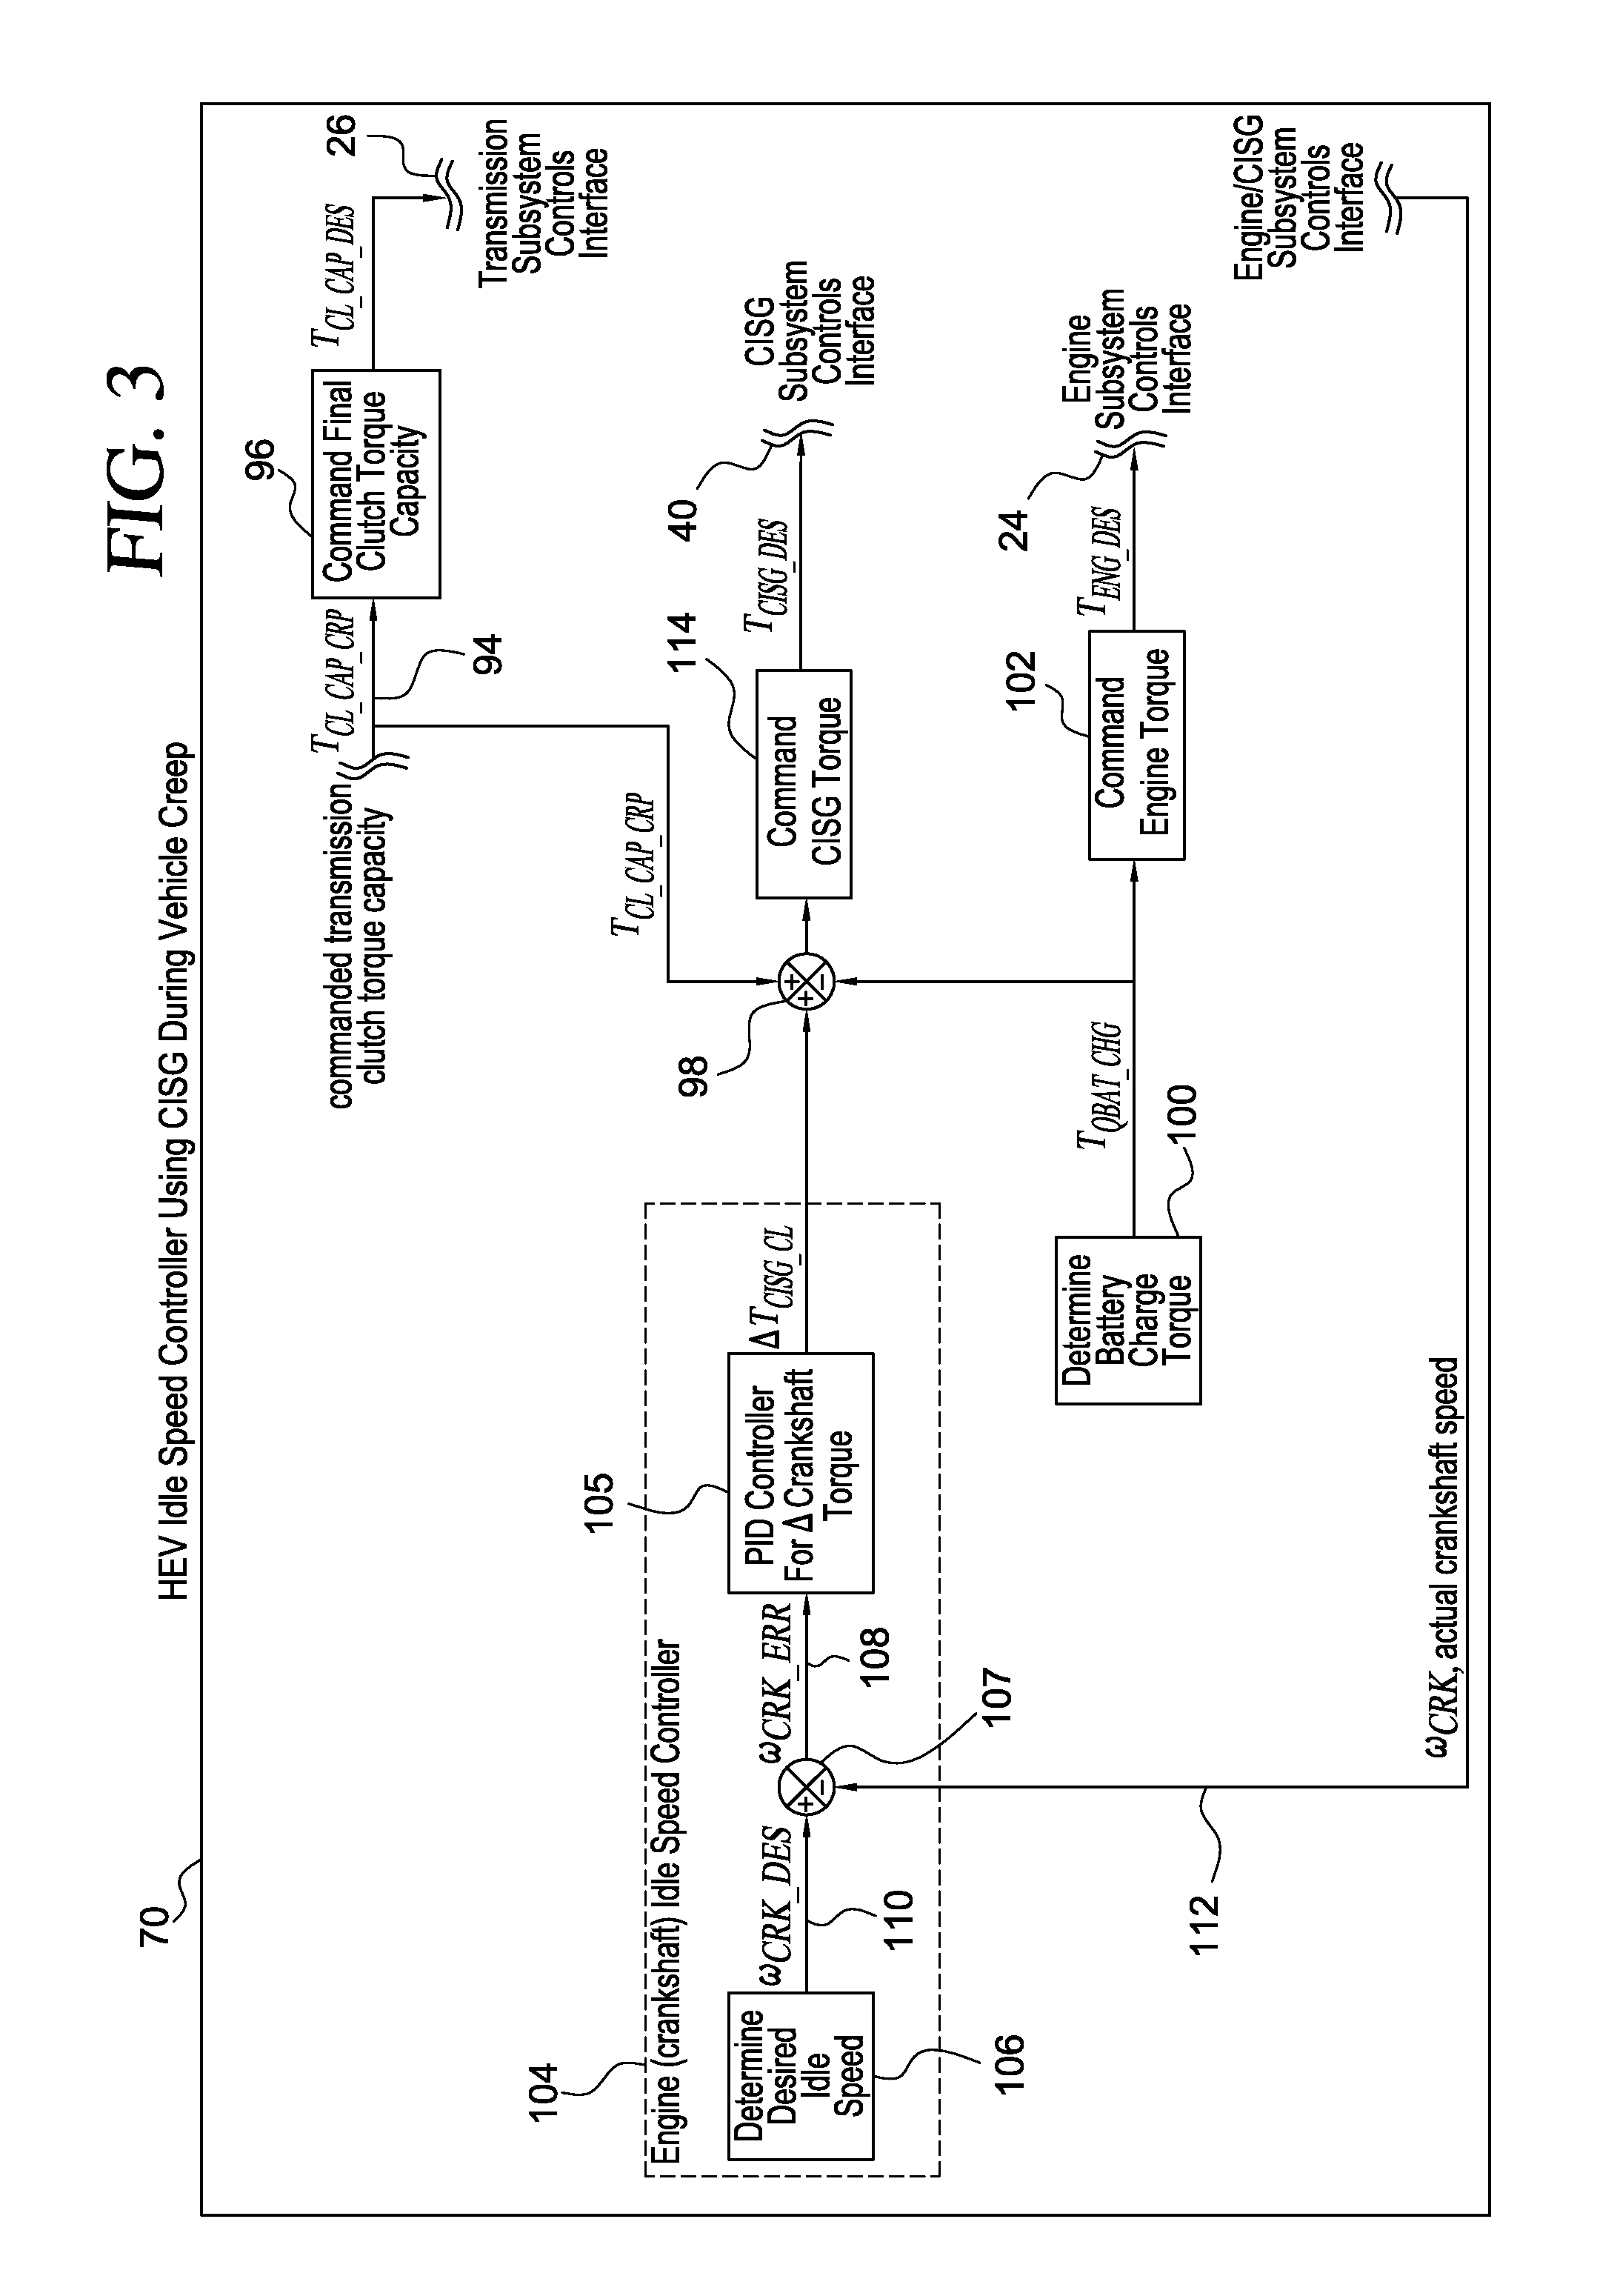 Idle speed control of a hybrid electric vehicle